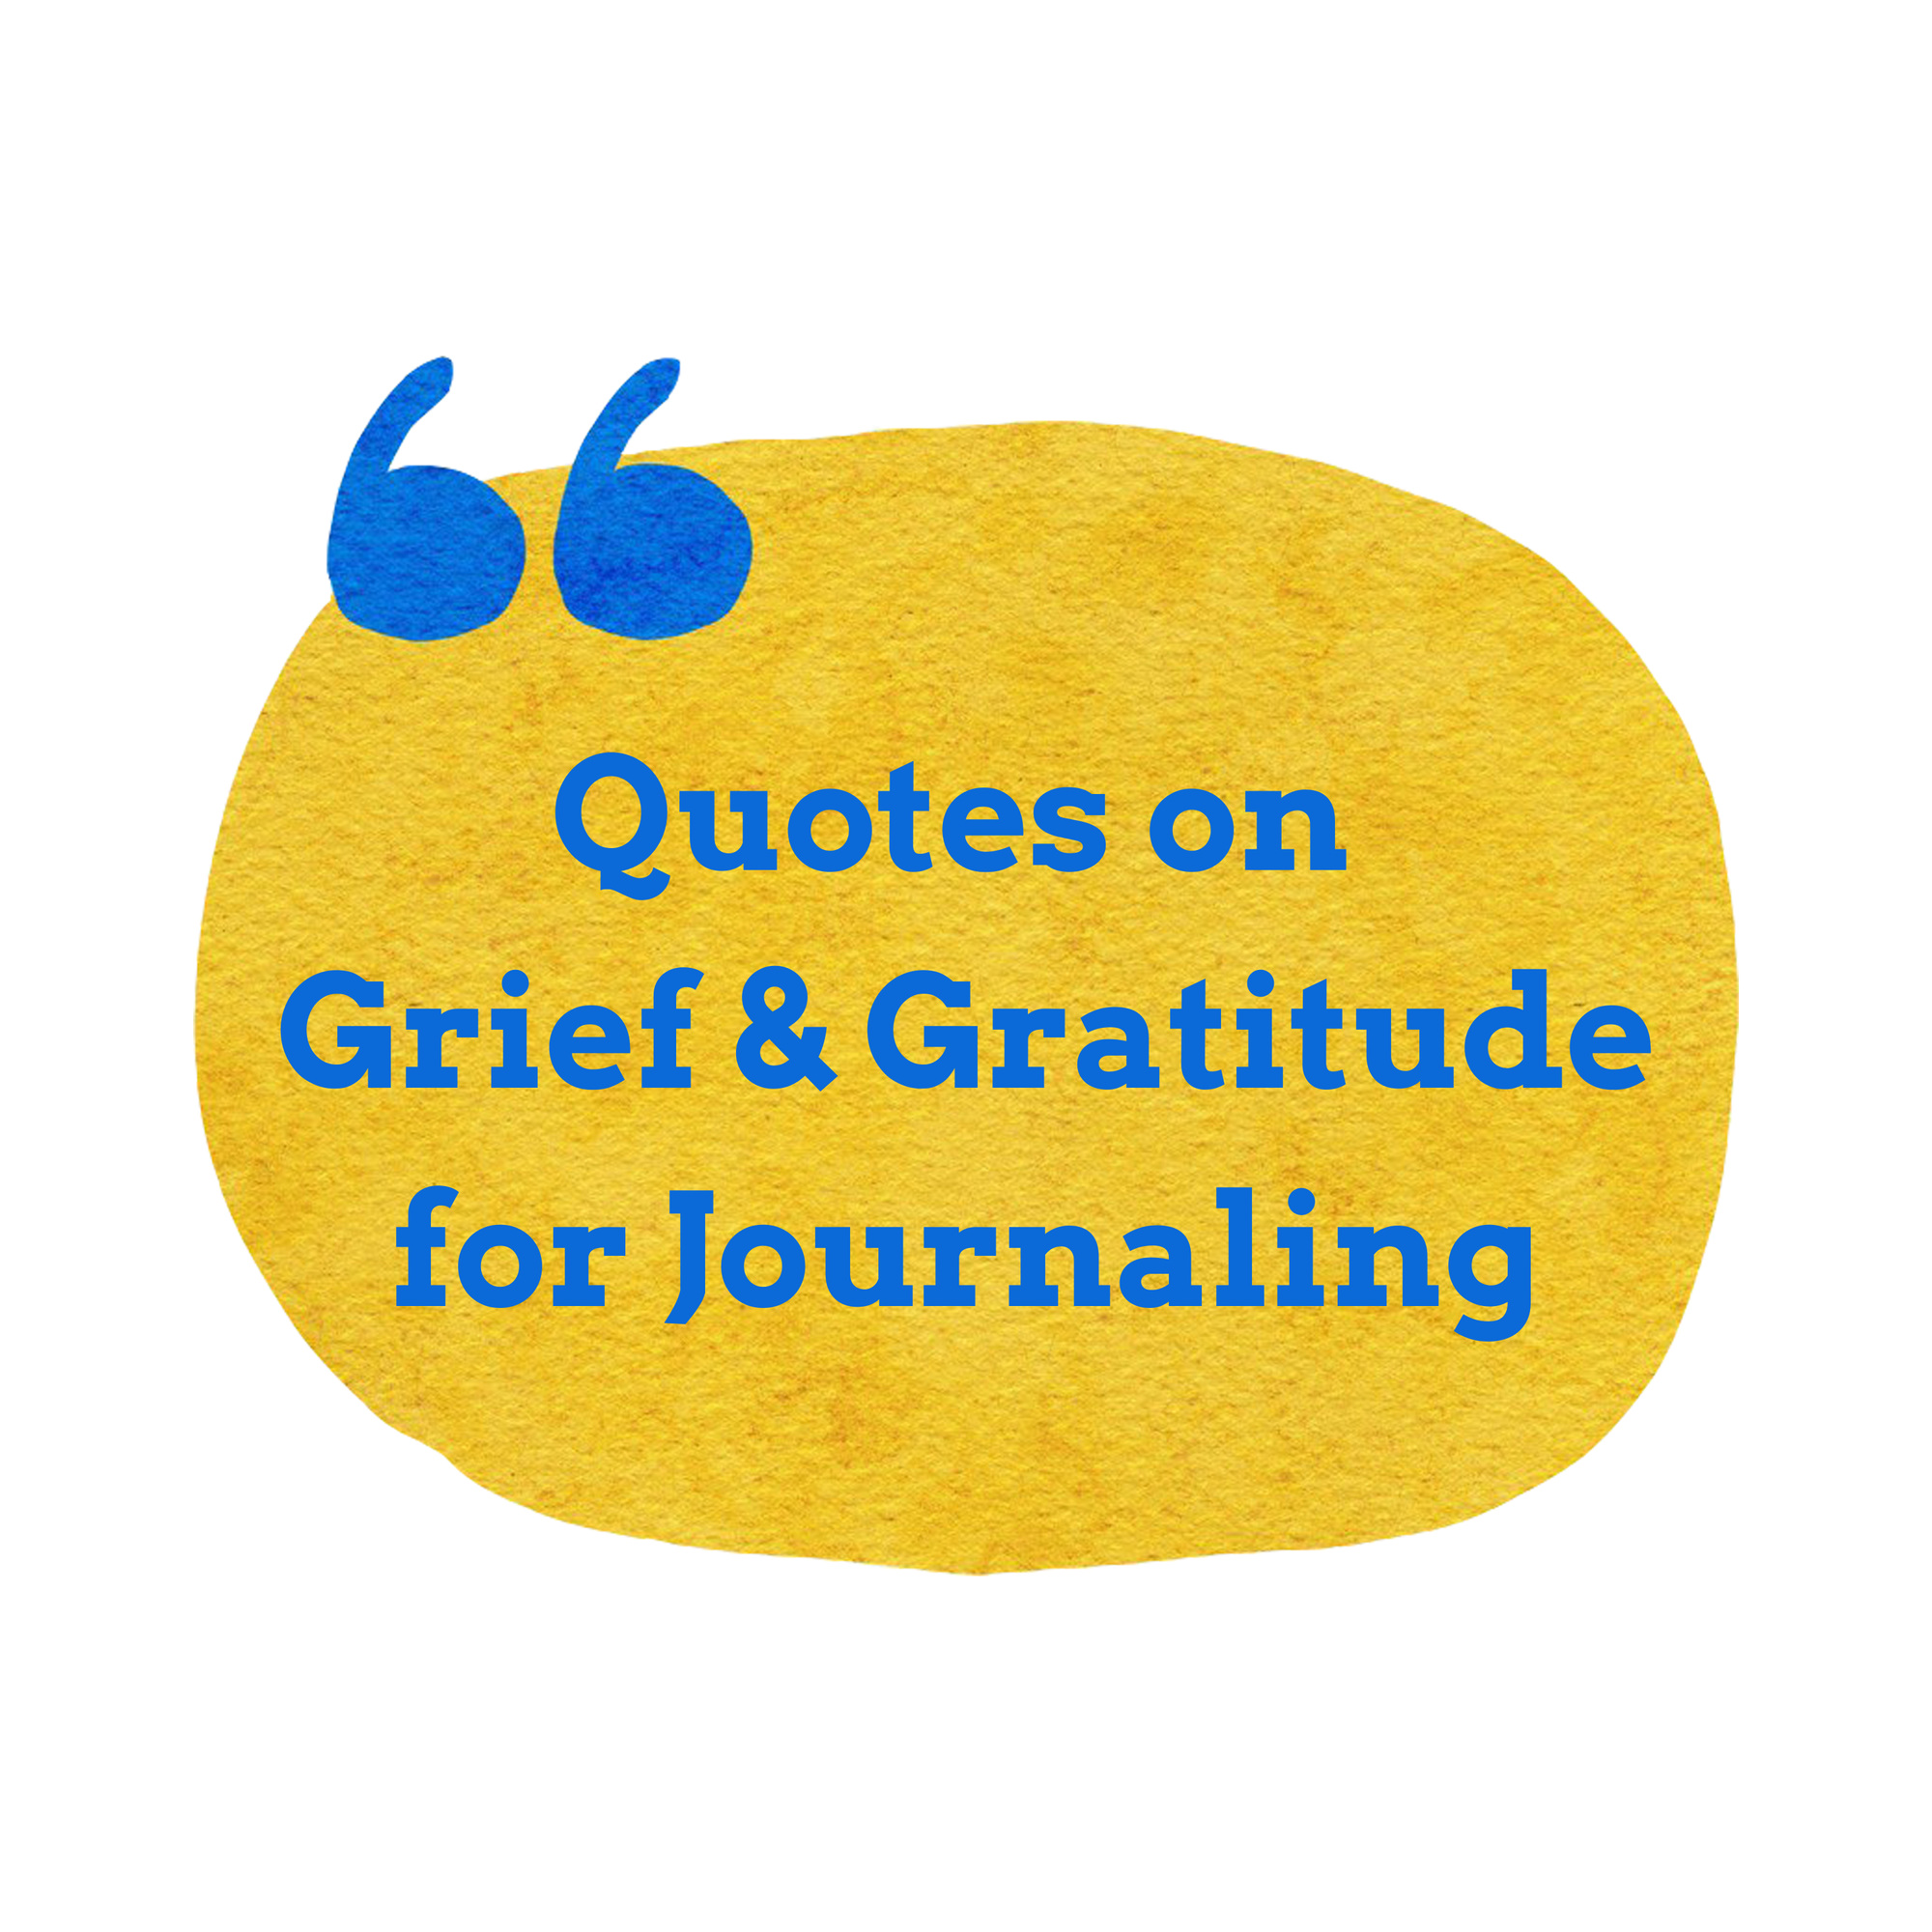 A graphic of a large yellow circle with a quotation mark and the words "Quotes on Grief and Gratitude for Journaling"